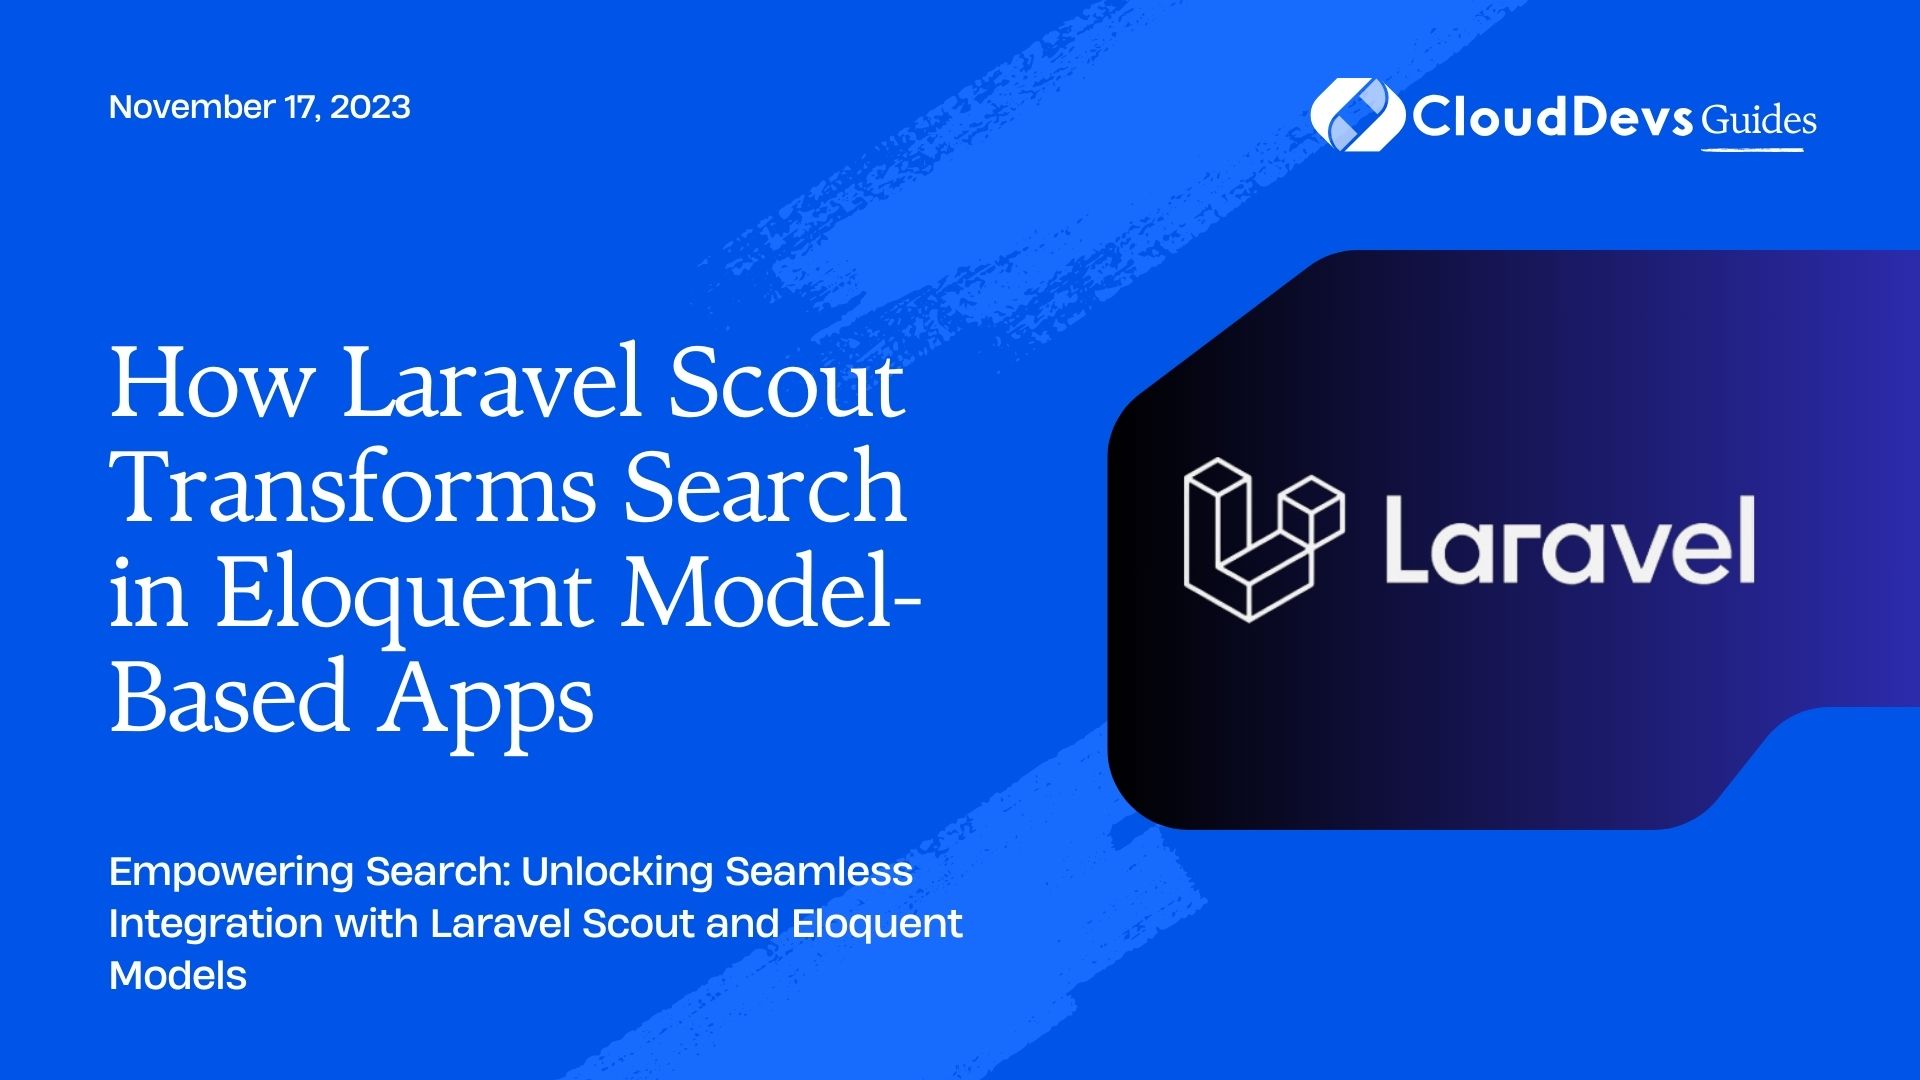 How Laravel Scout Transforms Search in Eloquent Model-Based Apps